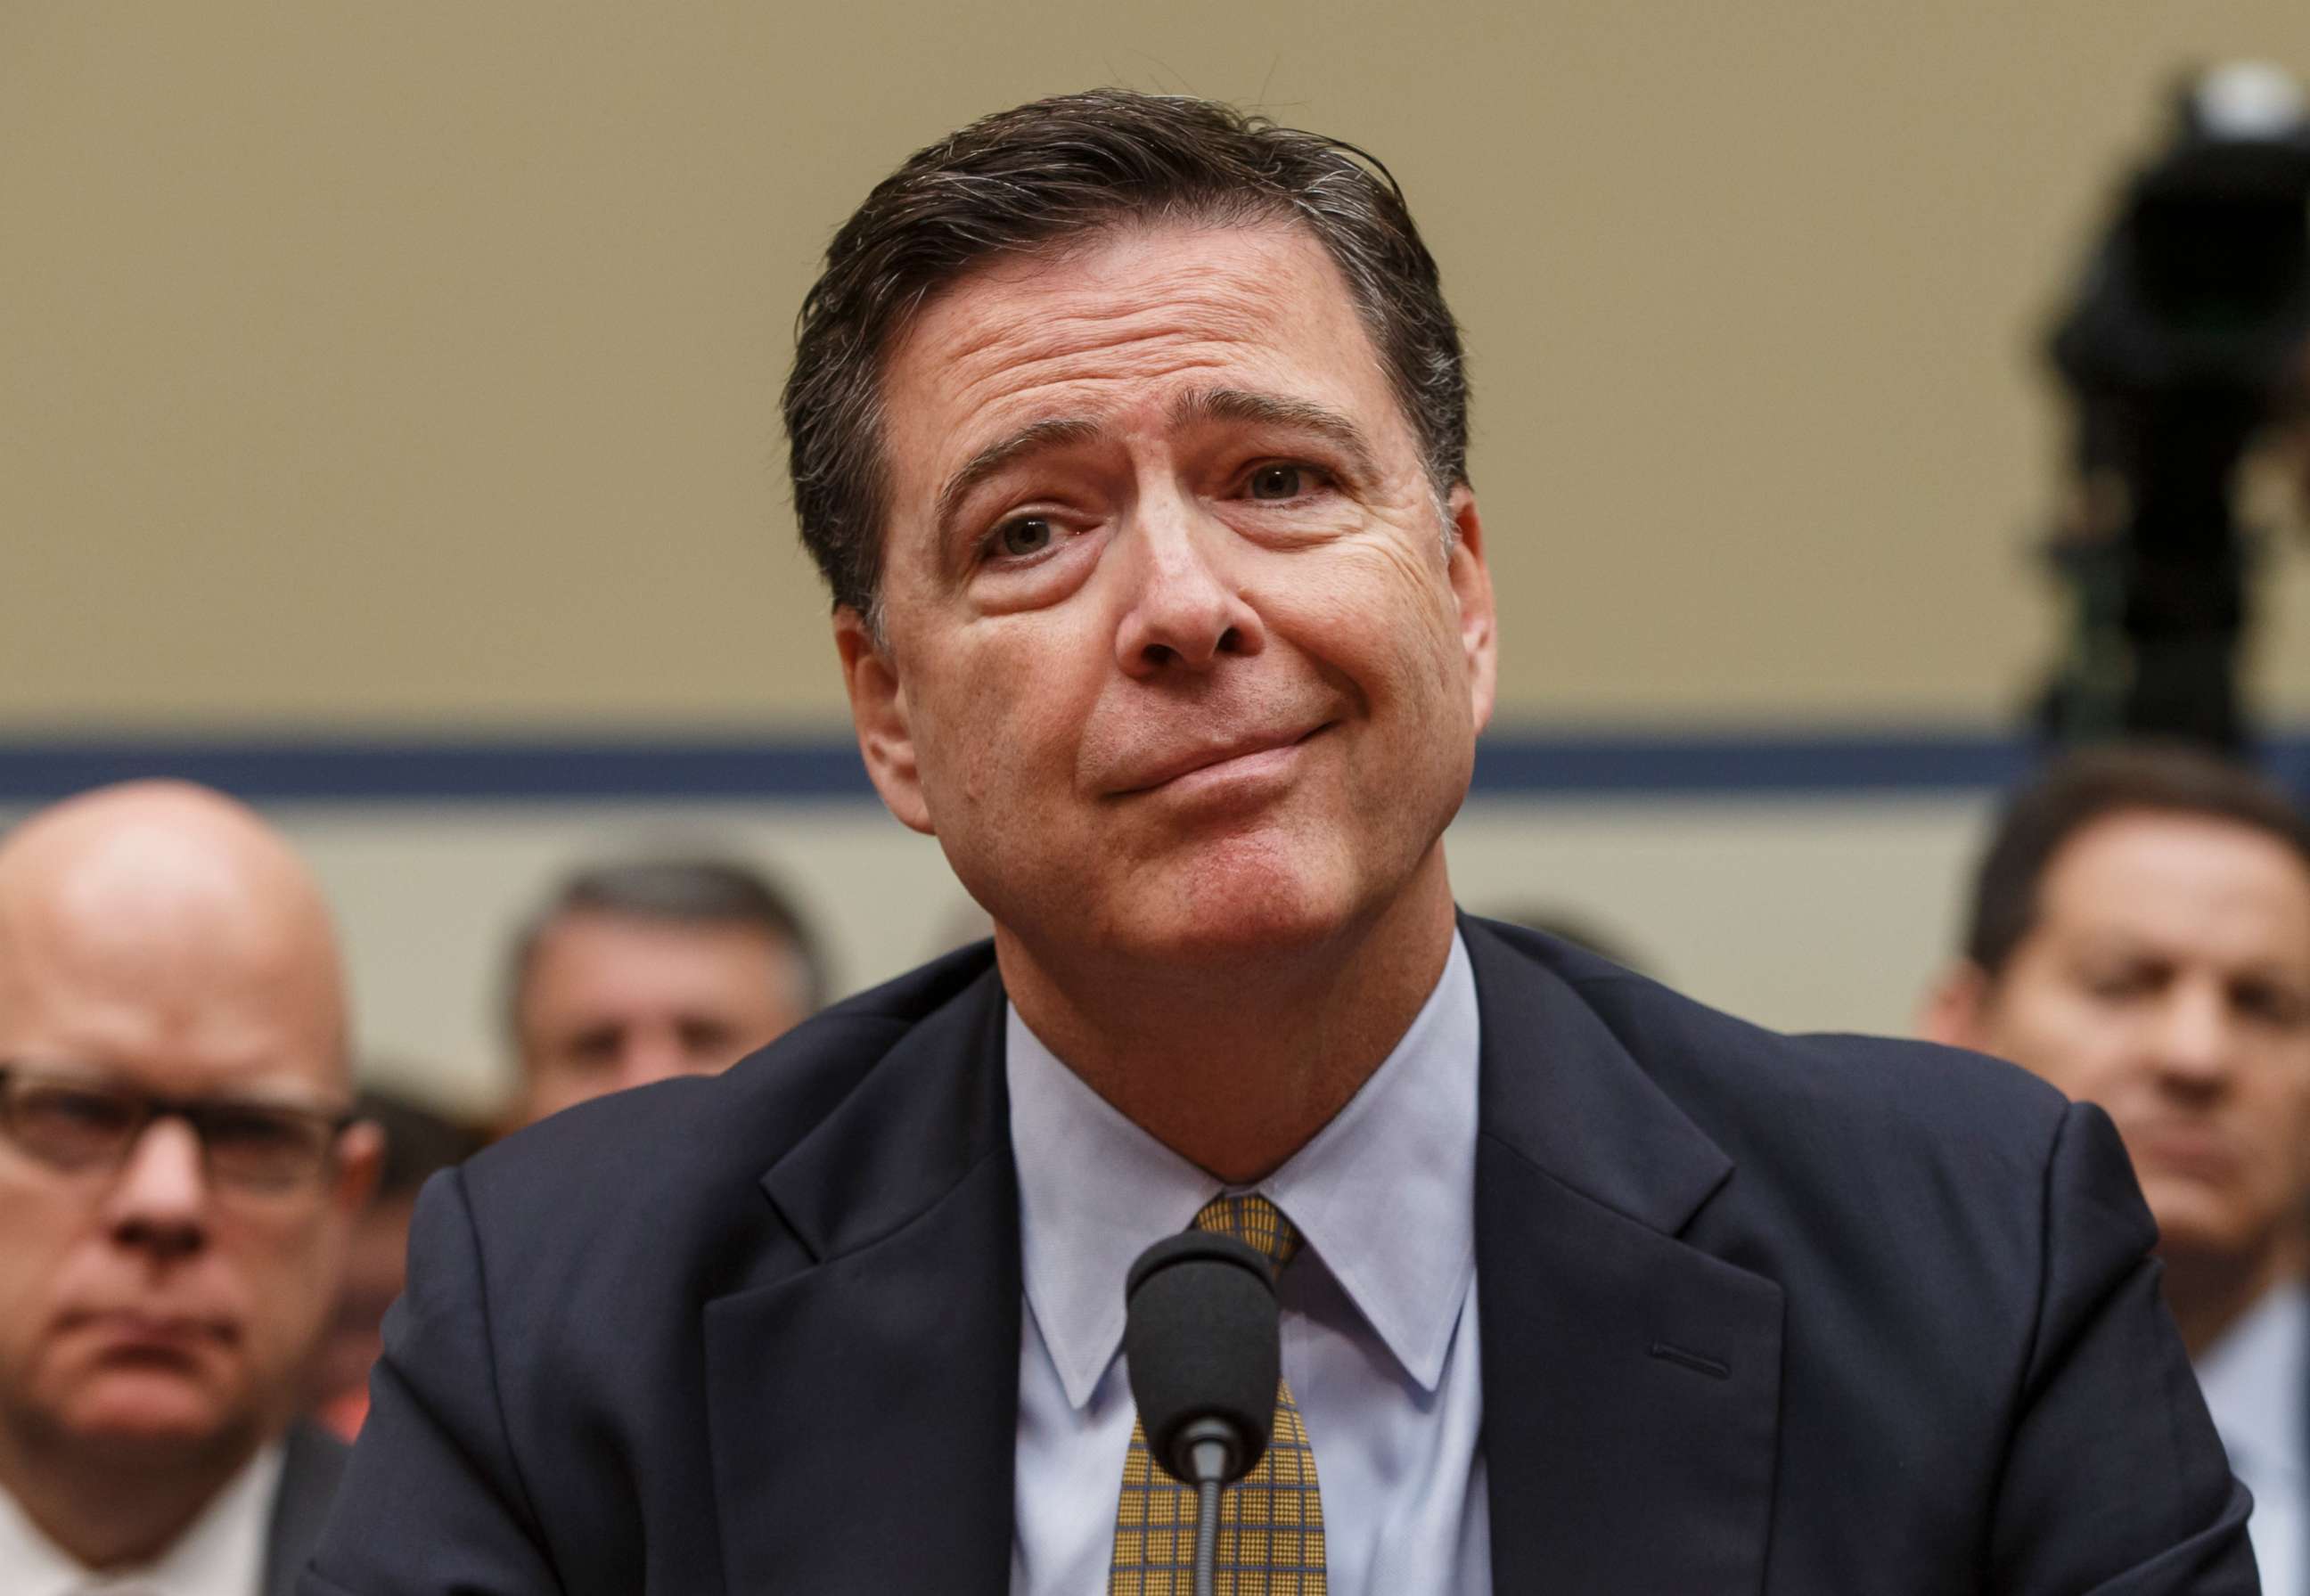 Then-FBI Director James Comey testifies before the House Oversight Committee to discuss Hillary Clinton's email investigation, at the Capitol in Washington, July 7, 2016.